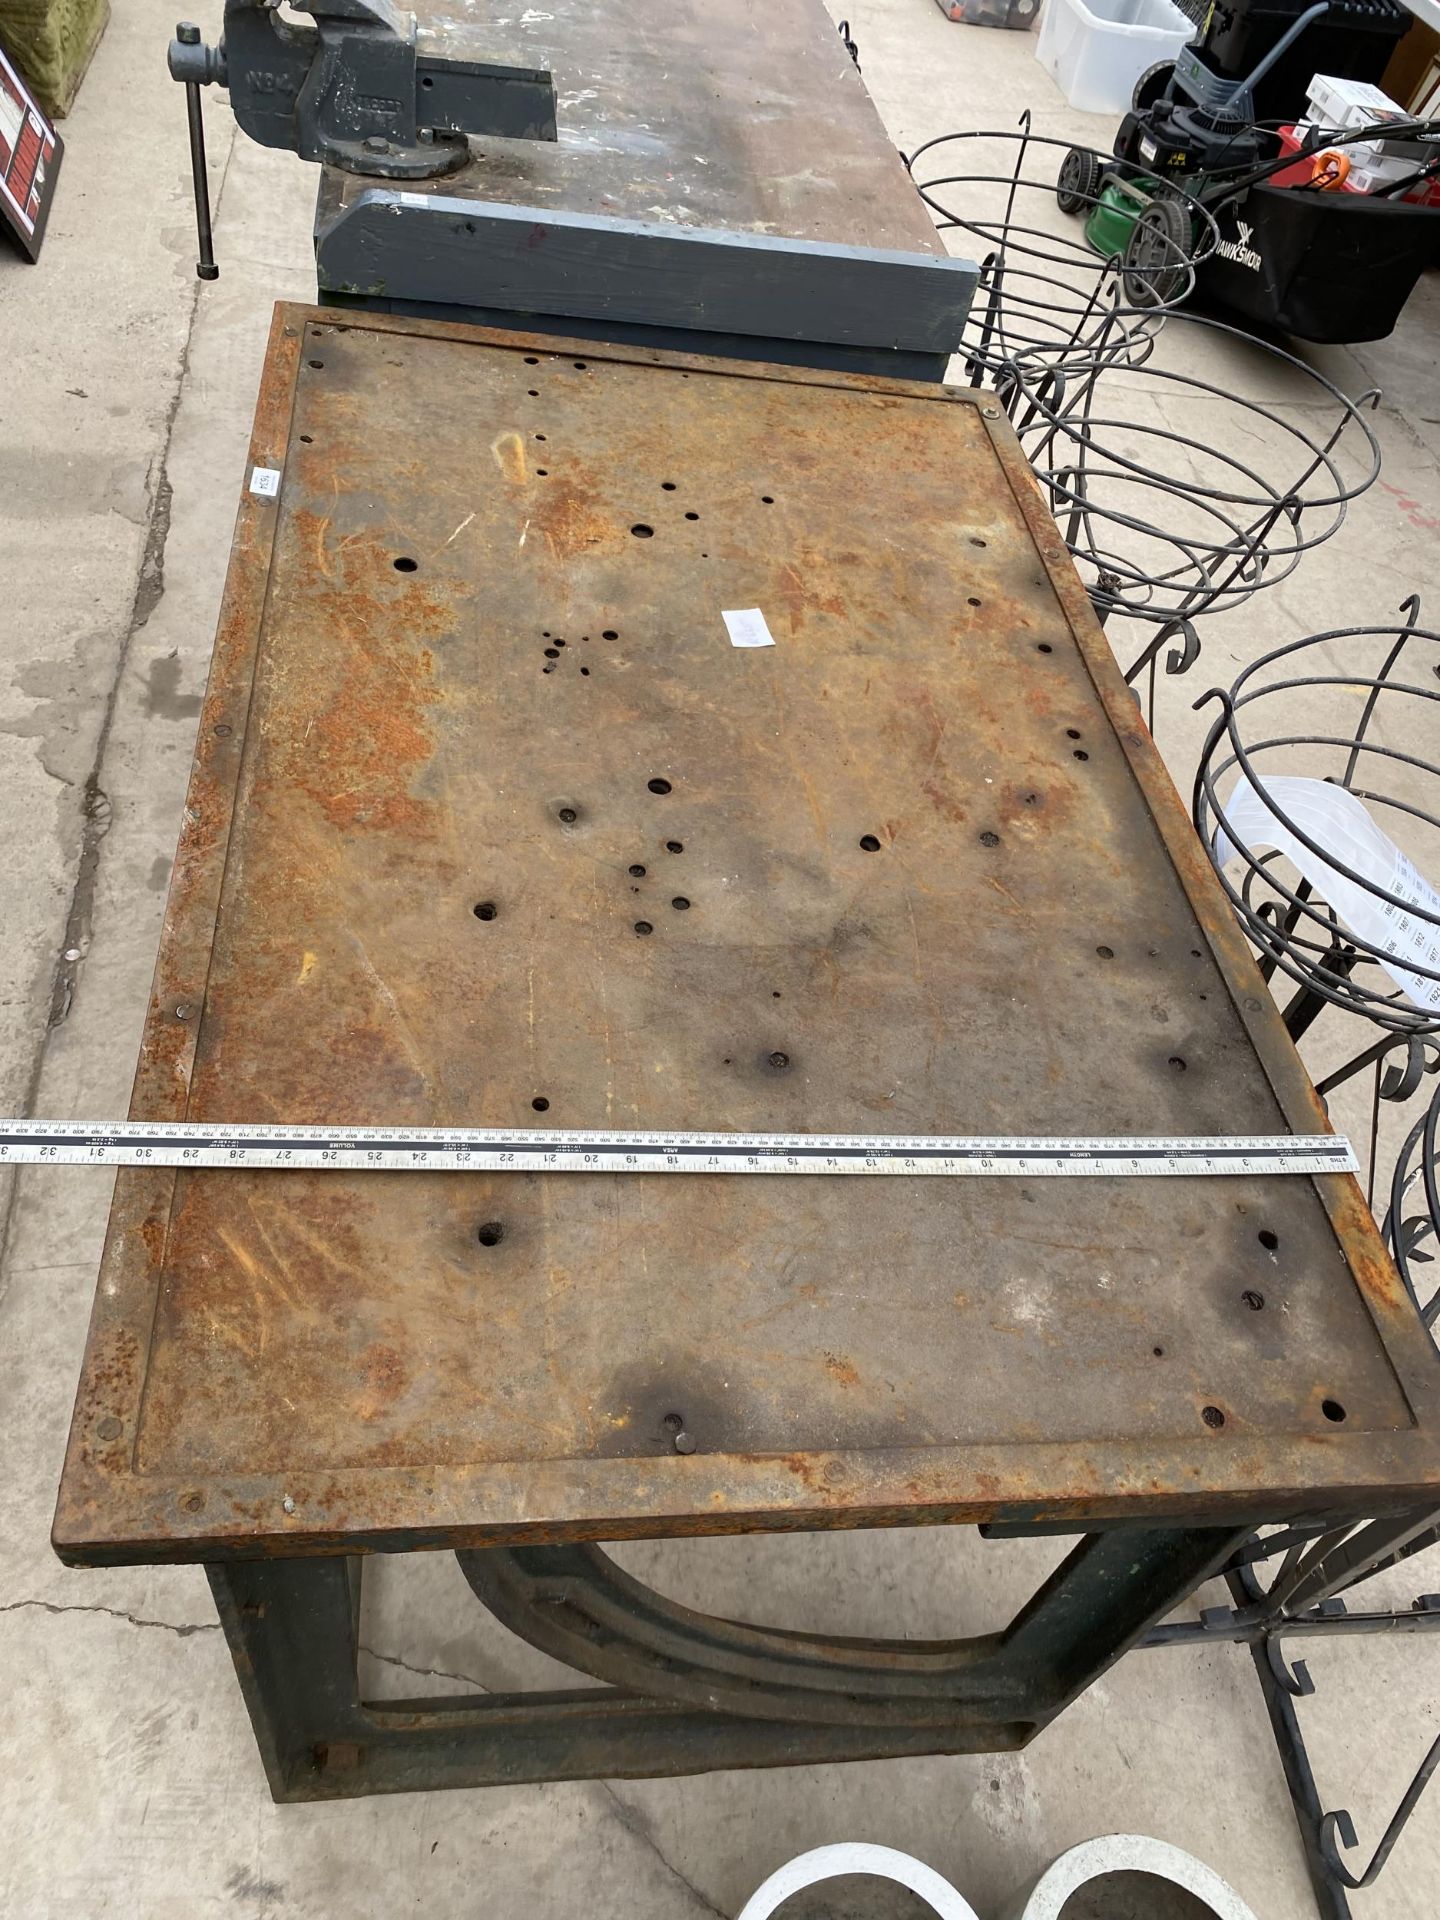 A HEAVY INDUSTRIAL METAL WORK BENCH - Image 3 of 5